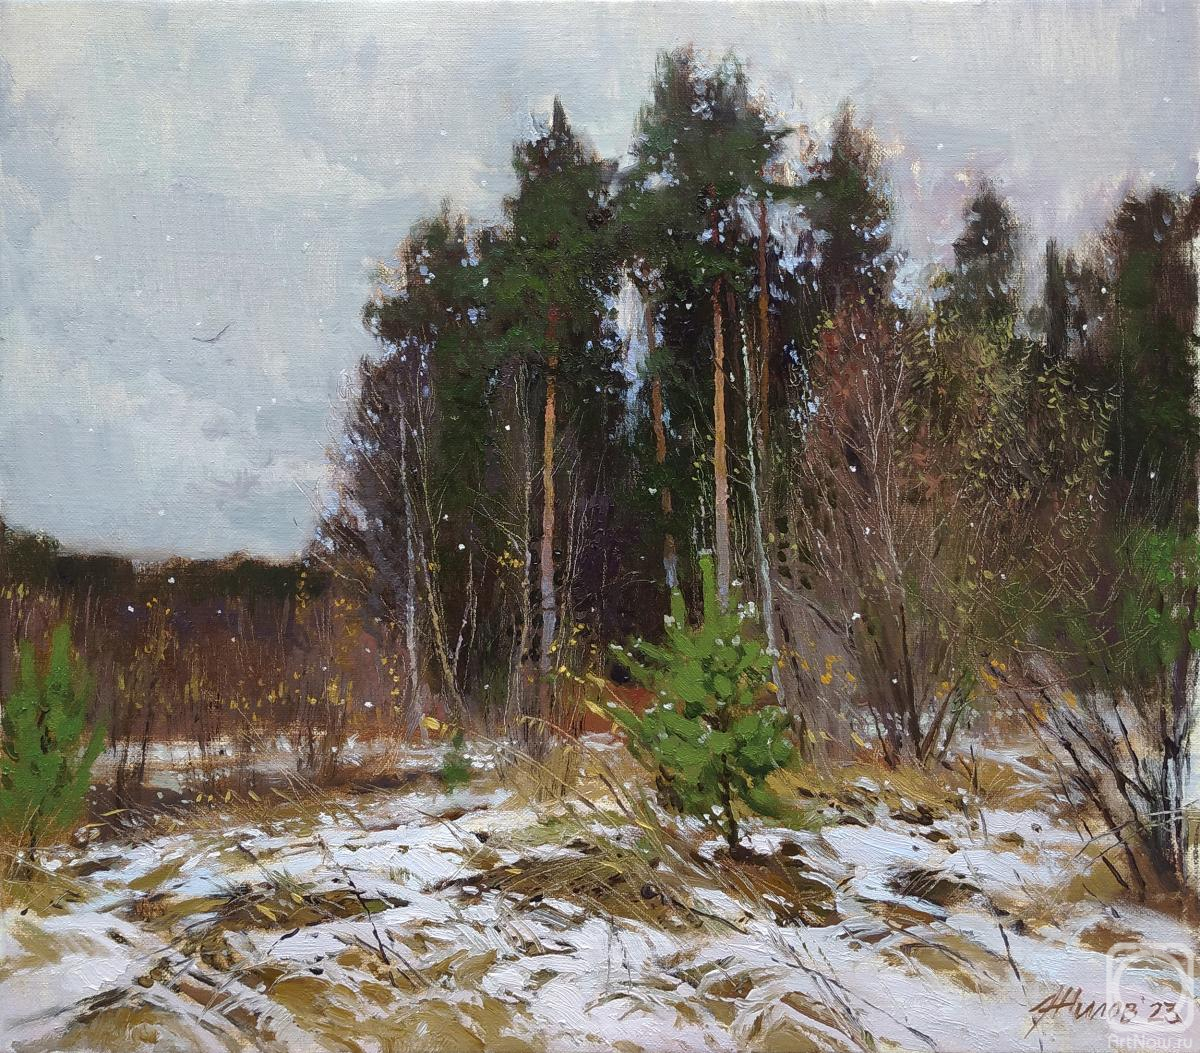 Zhilov Andrey. The snow was falling timidly